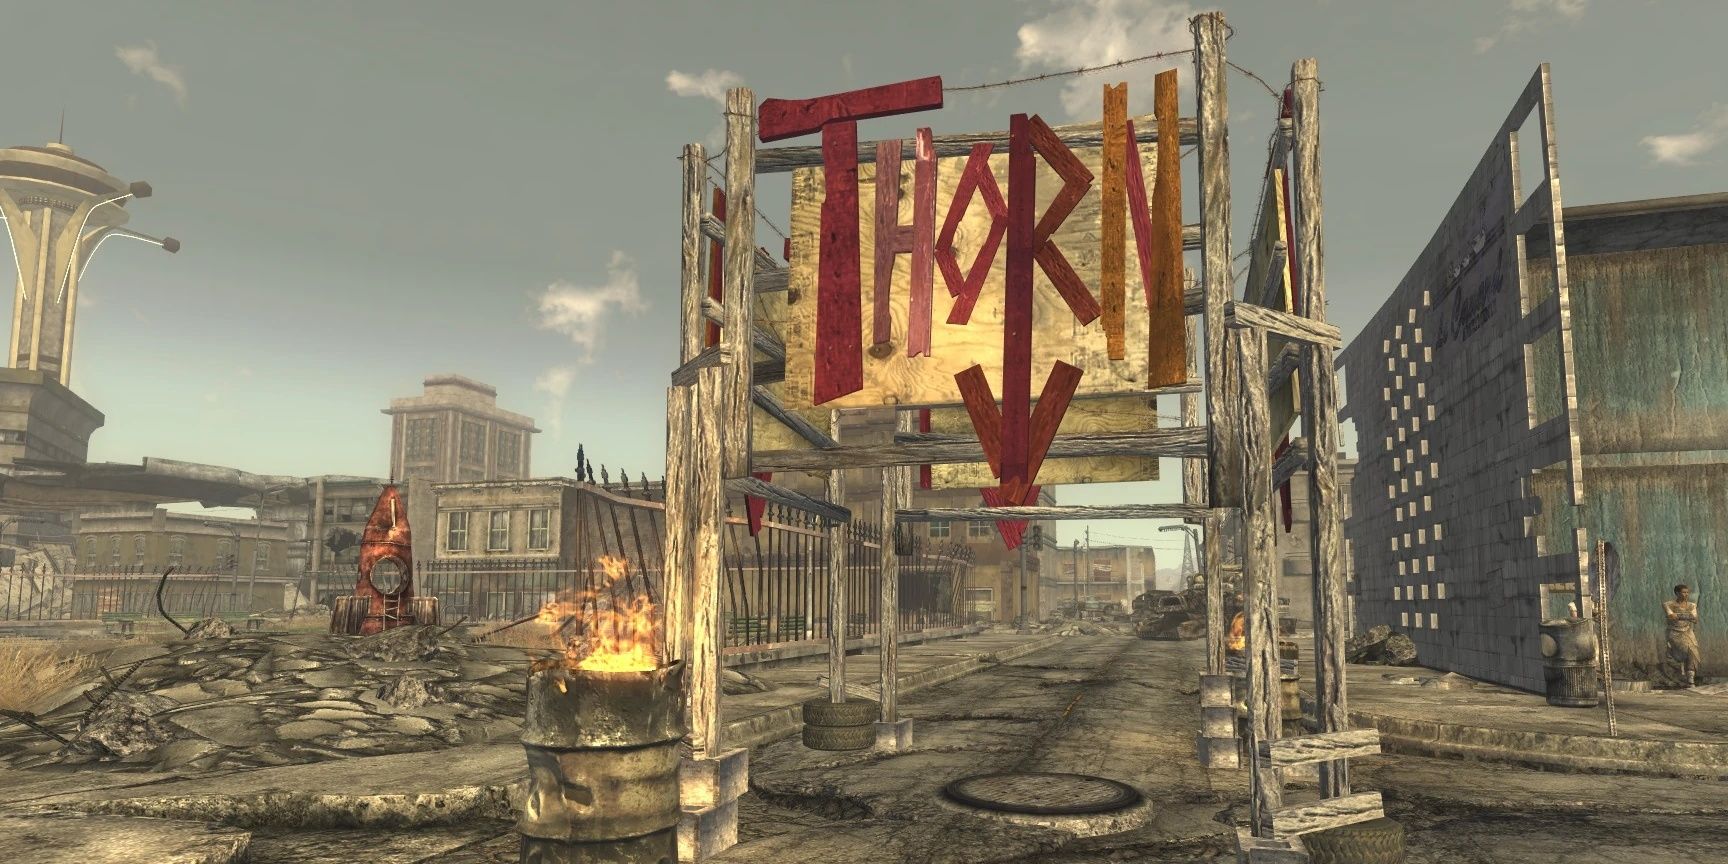 The Thorn Entrance From Fallout New Vegas